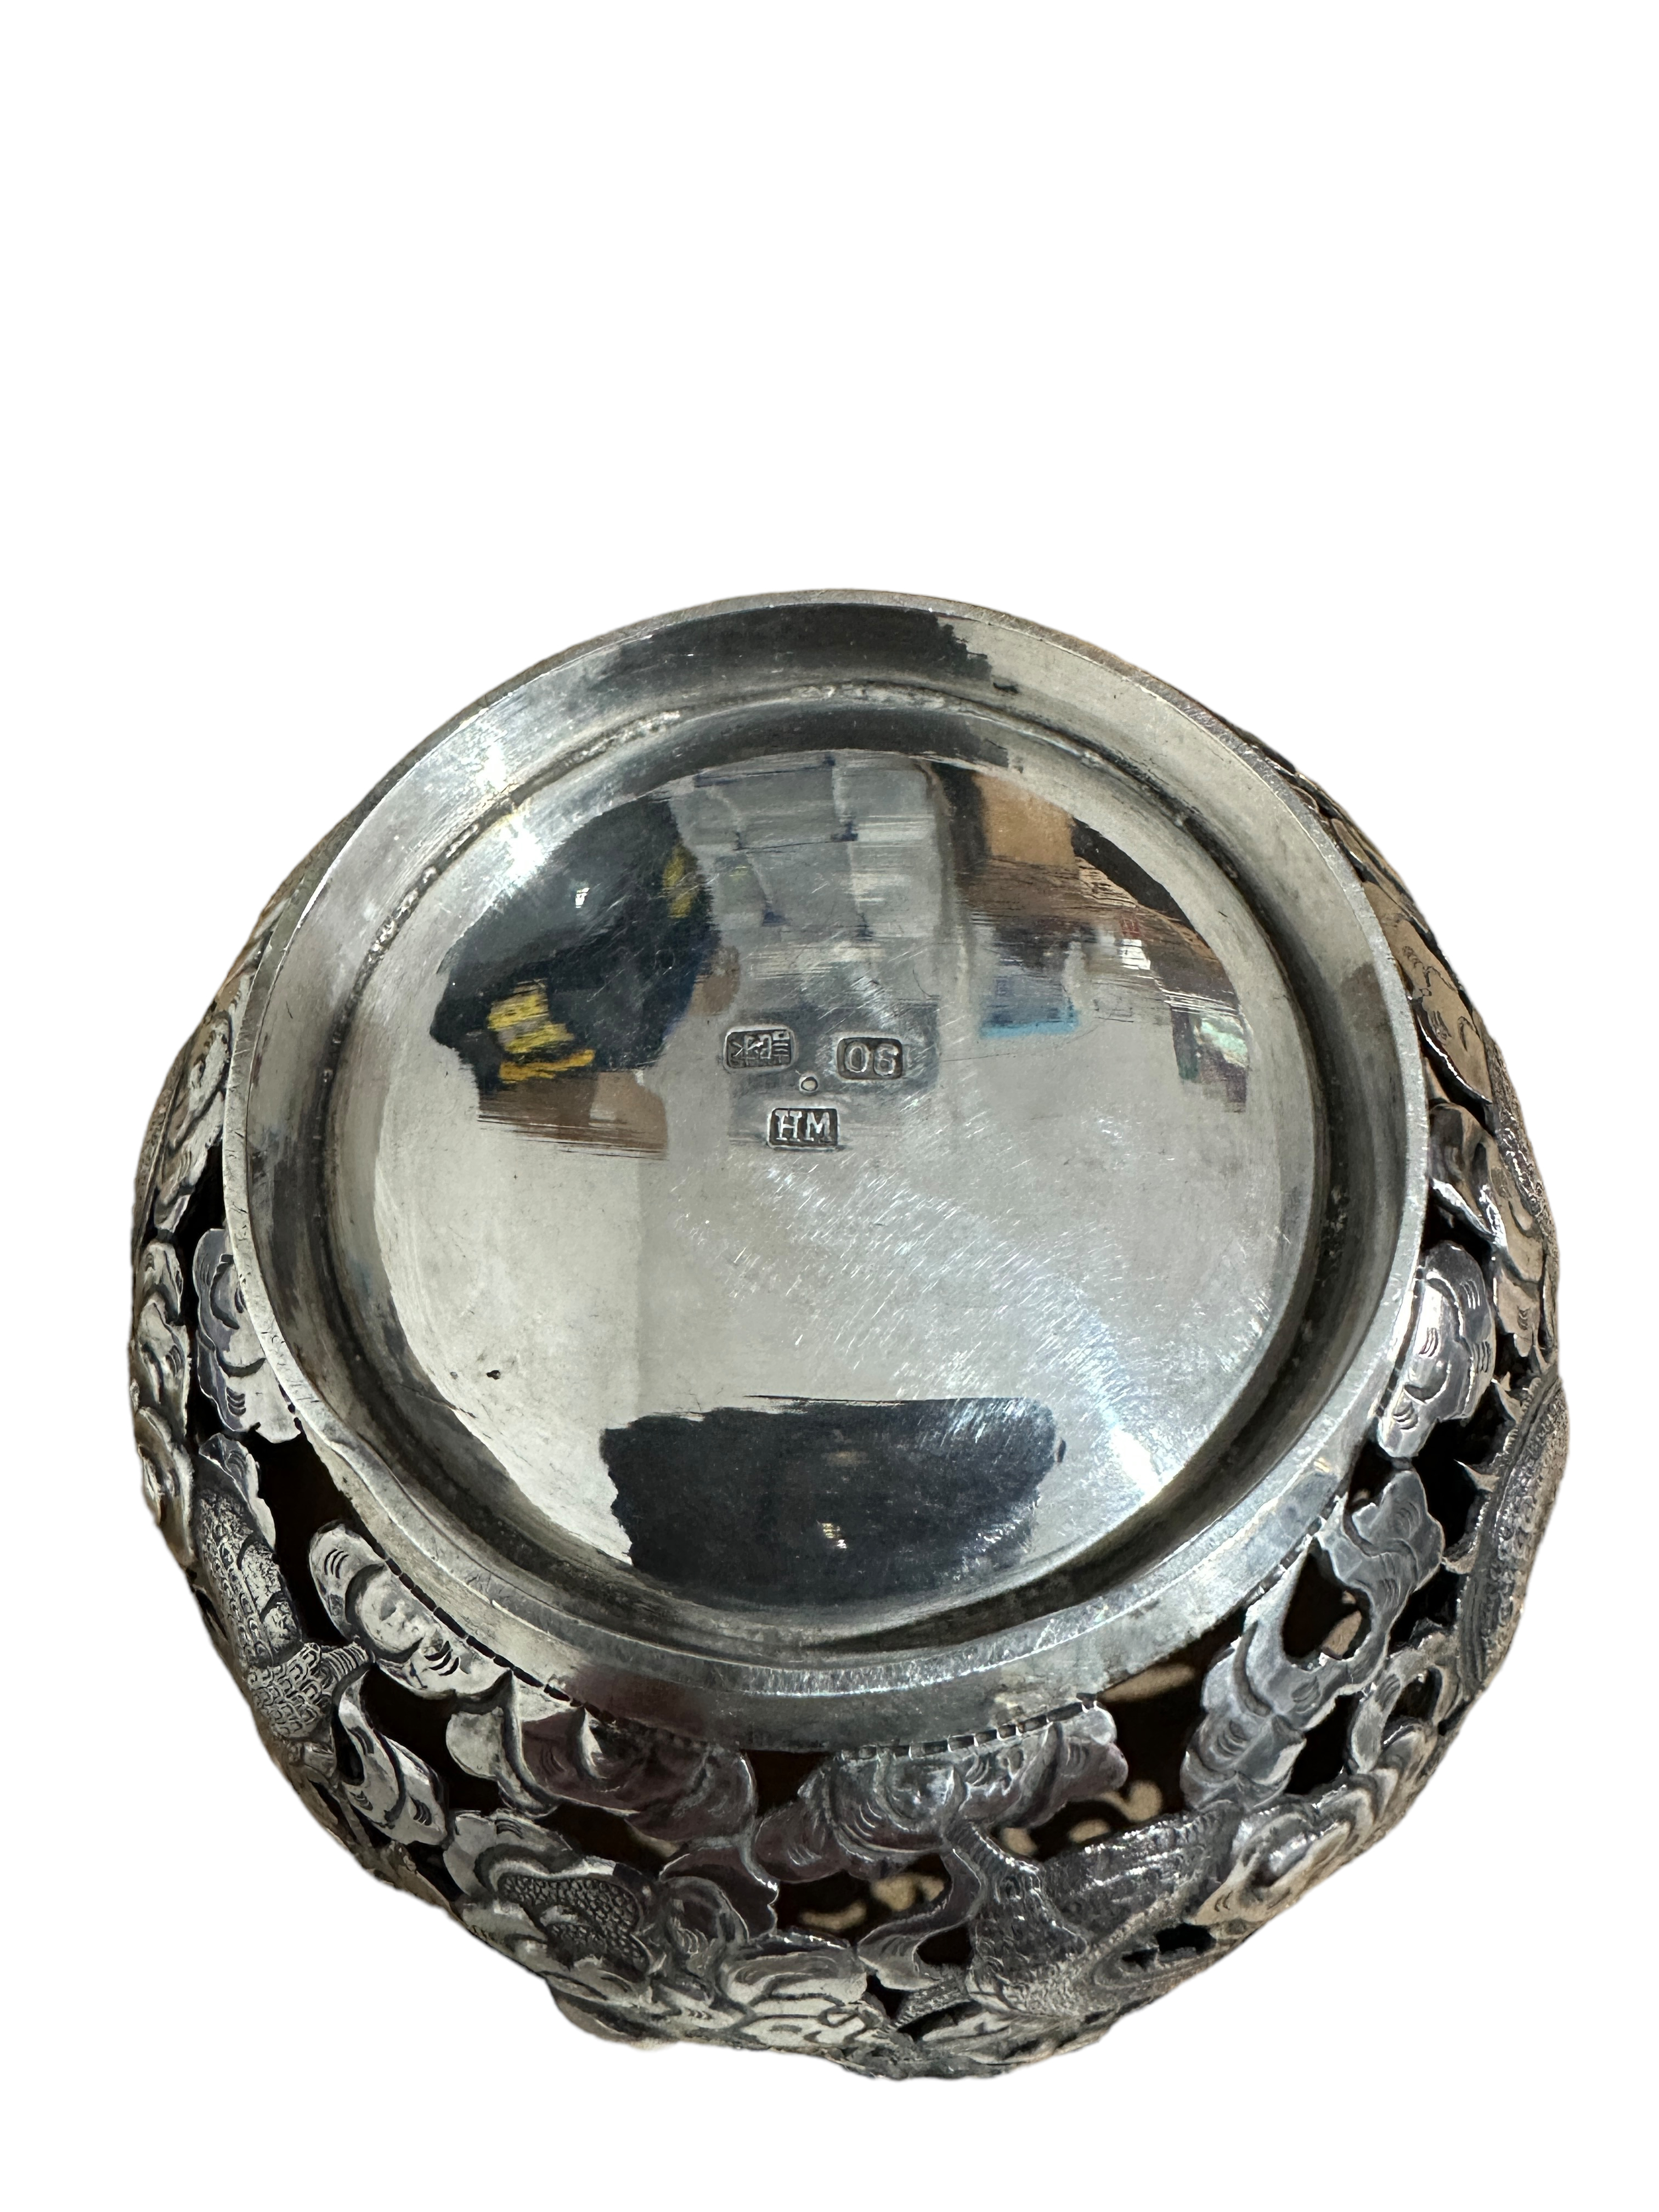 Antique Chinese Export Pierced Silver Bowl - 11.2cm diameter and 5.7cm tall. - Image 12 of 13